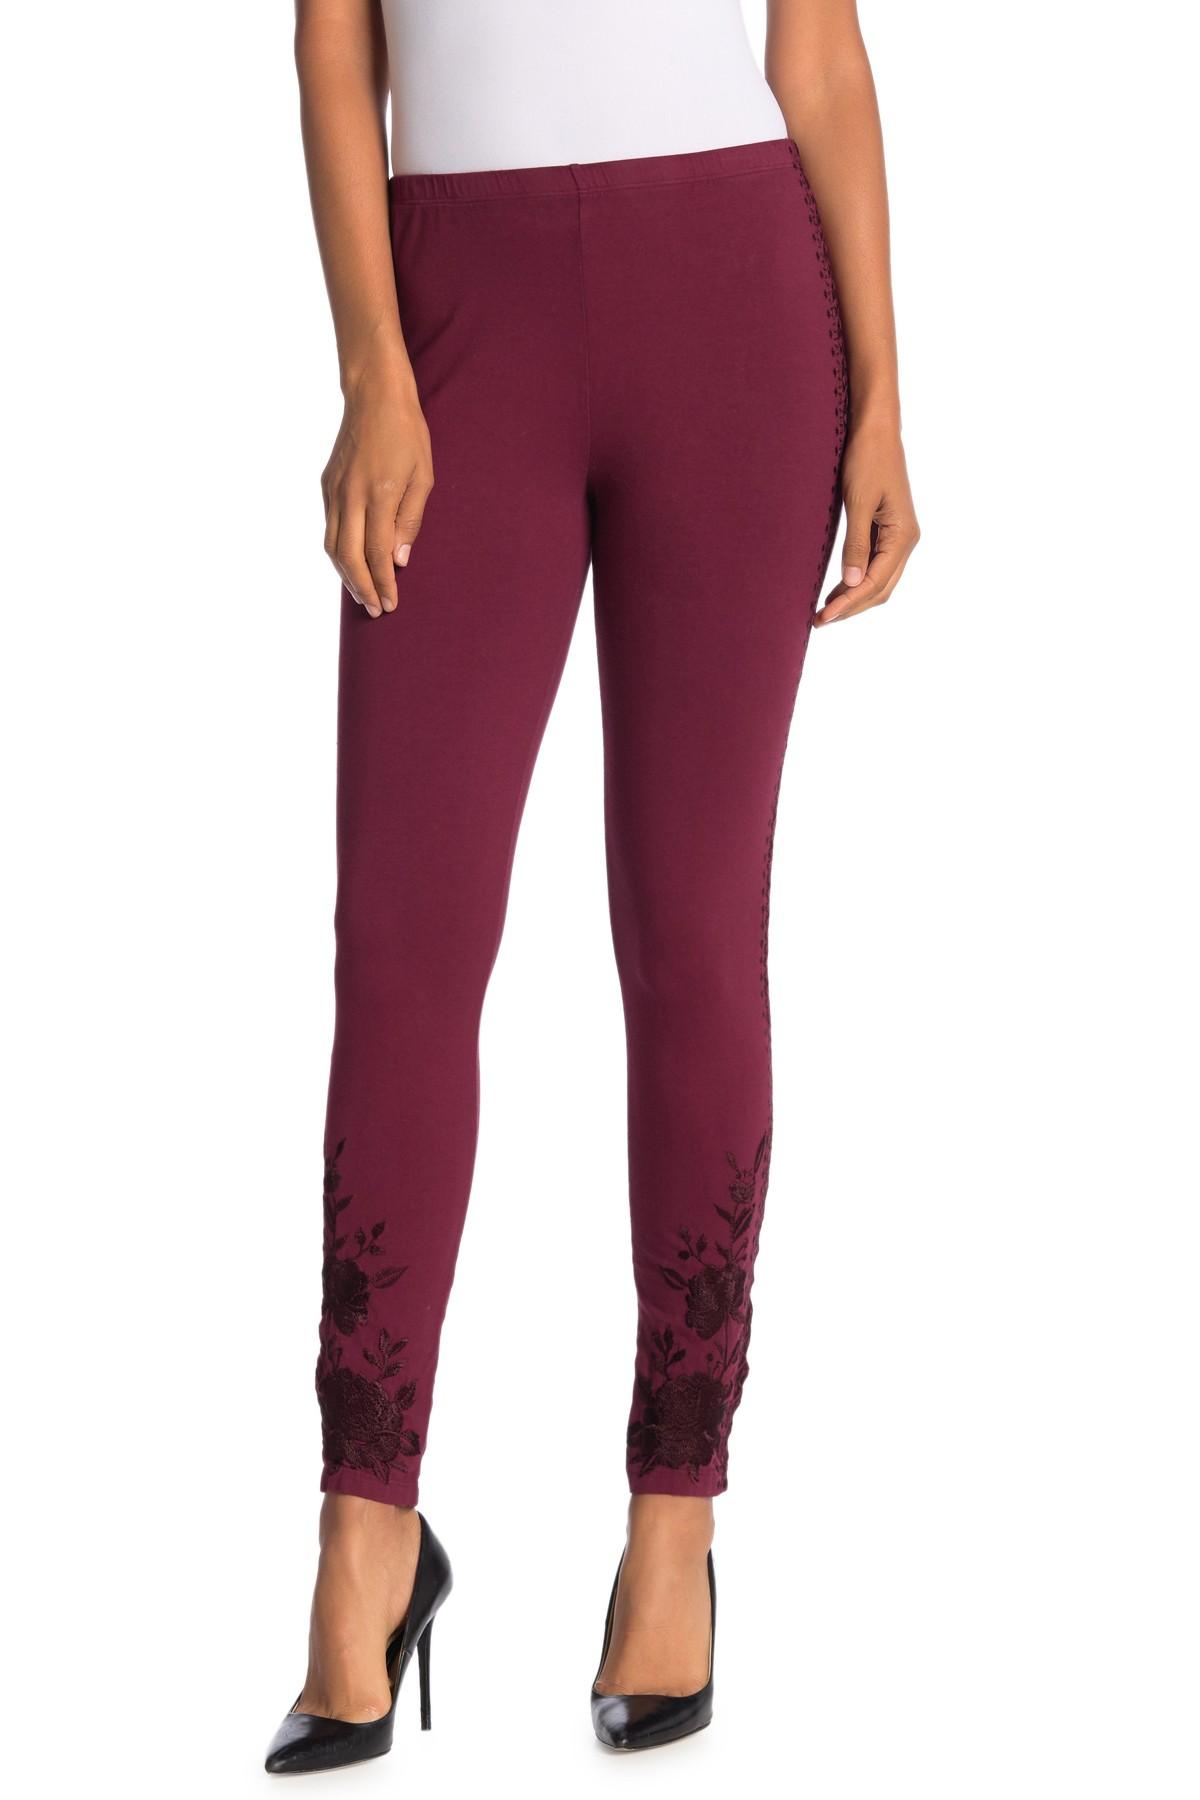 Johnny Was Cotton Magdalene Embroidered Leggings - Lyst